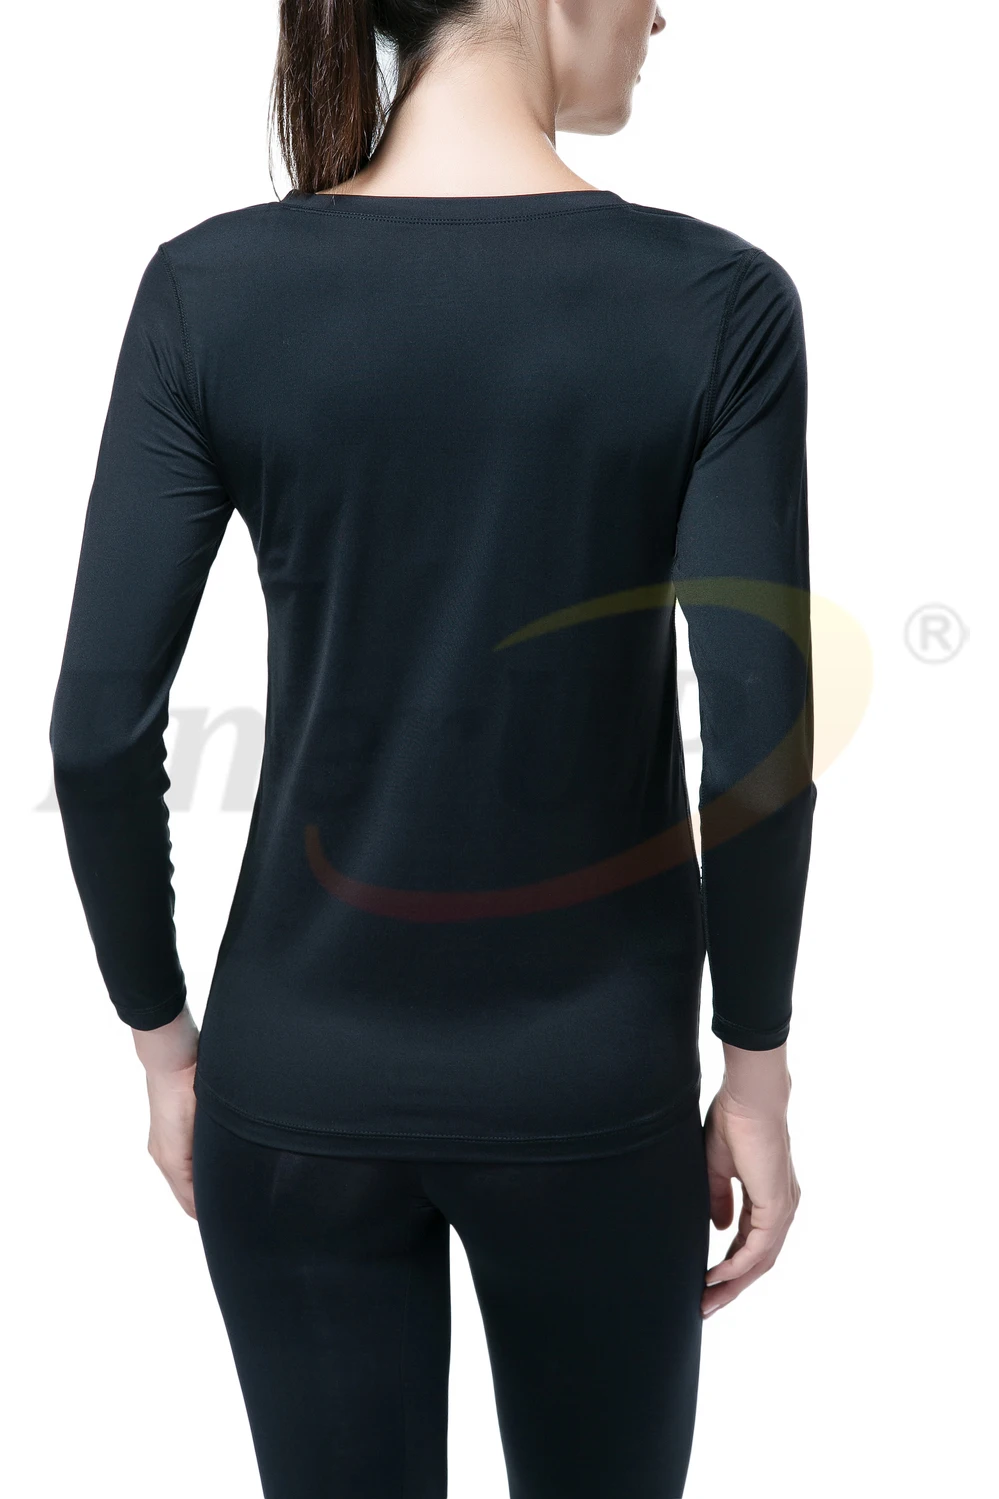 copper infused long sleeve compression skin tight inner wear for women